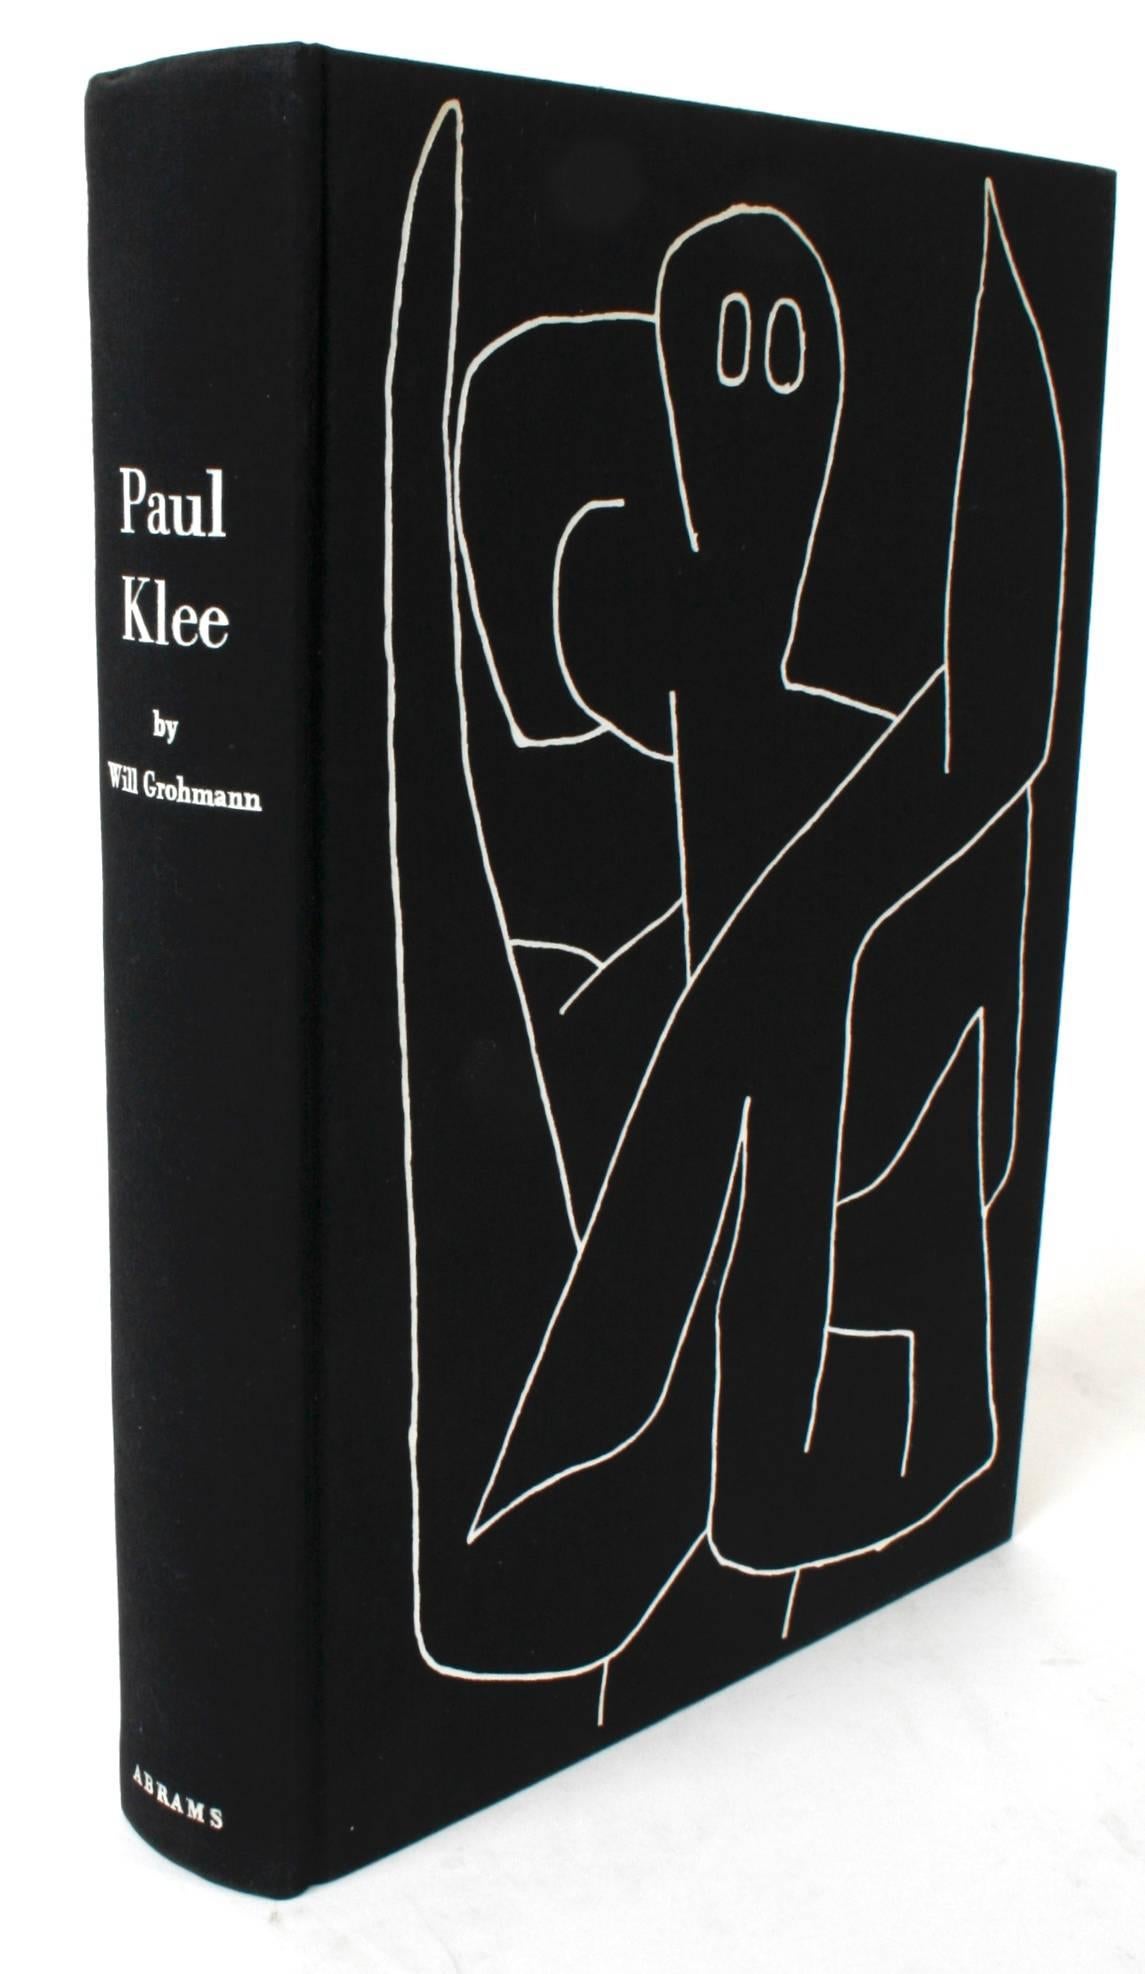 Paul Klee by Will Grohamann. New York: Harry N. Abrams, Inc., Publishers. 1954. Hardcover with dust jacket. 448 pp. A large art book on Paul Klee. The book was conceived in 1936 by the author and friend of Klee's, Will Grohamann. Klee personally